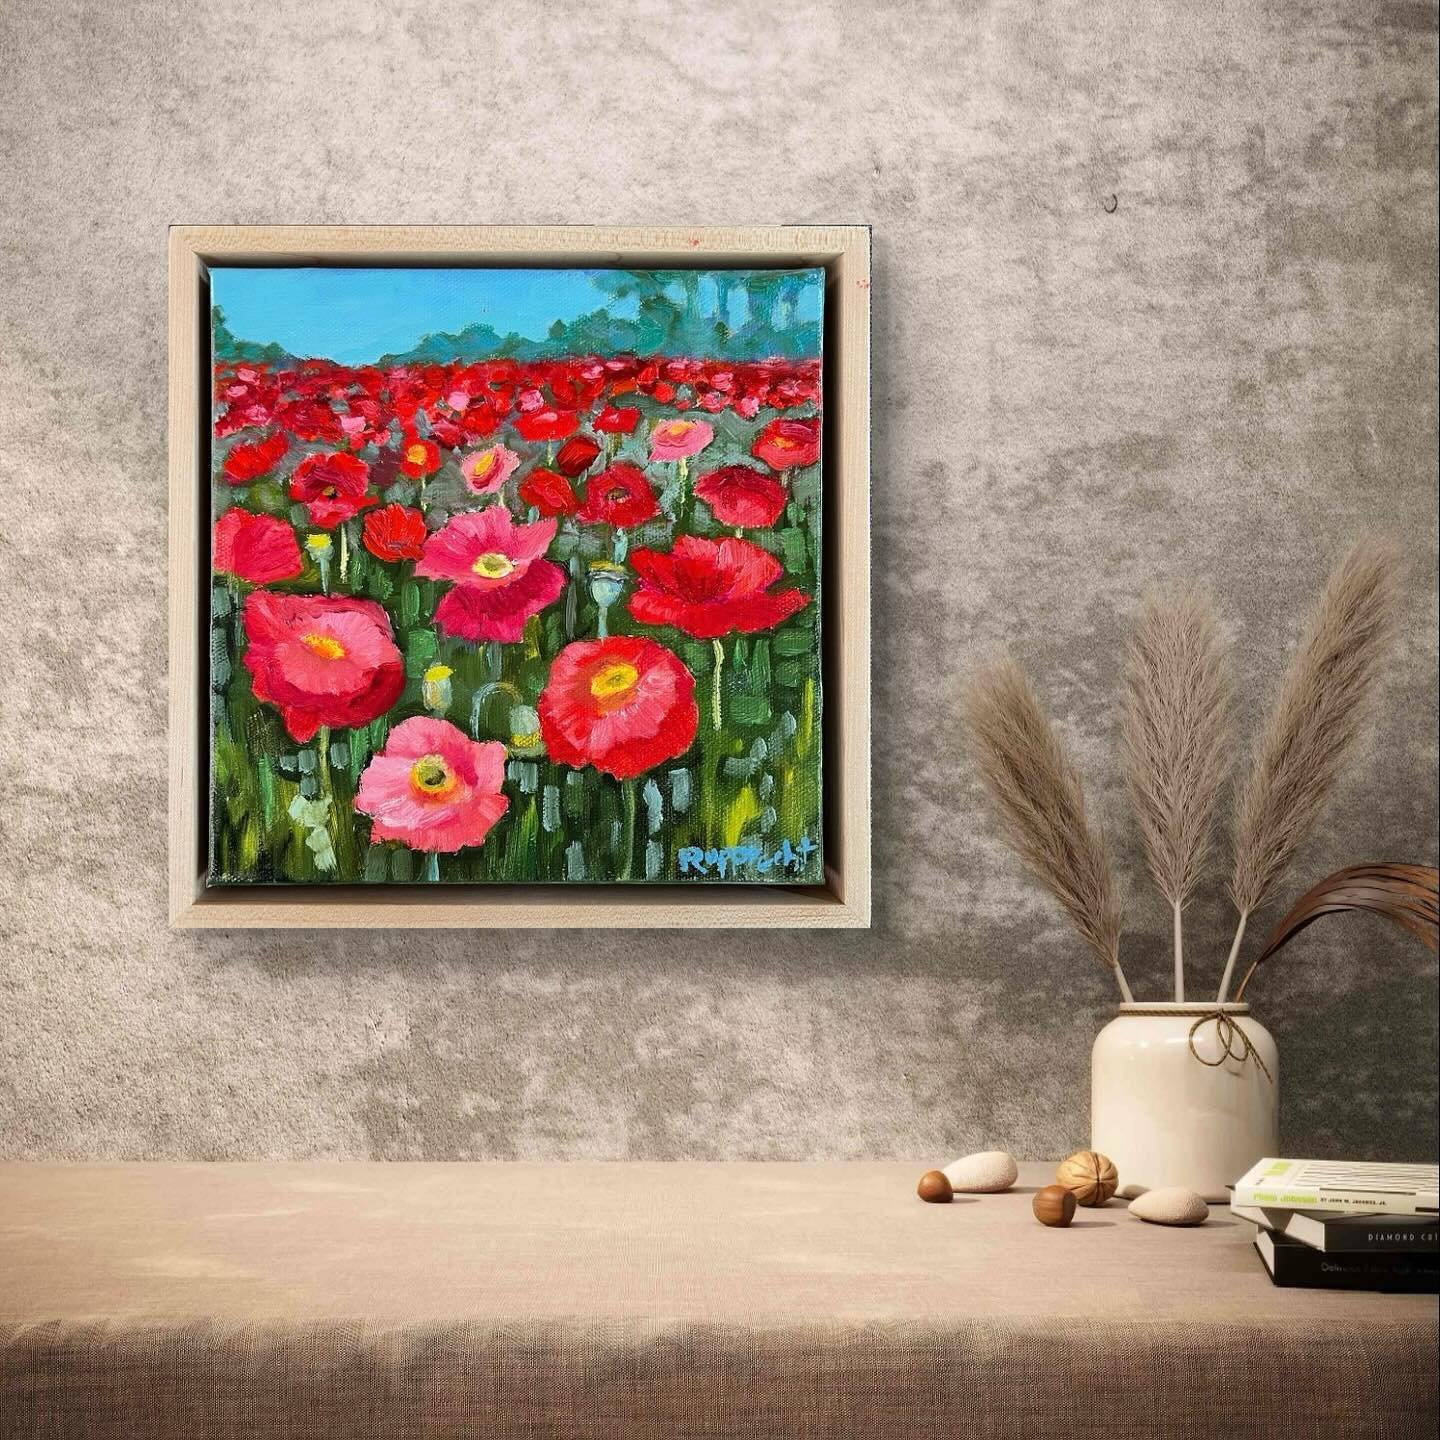 &ldquo;I must have flowers, always, and always.&rdquo; ― Claude Monet.
And as an avid gardener, I agree! Flowers of all kinds make my heart sing.

Find these beautiful paintings and more on my website.